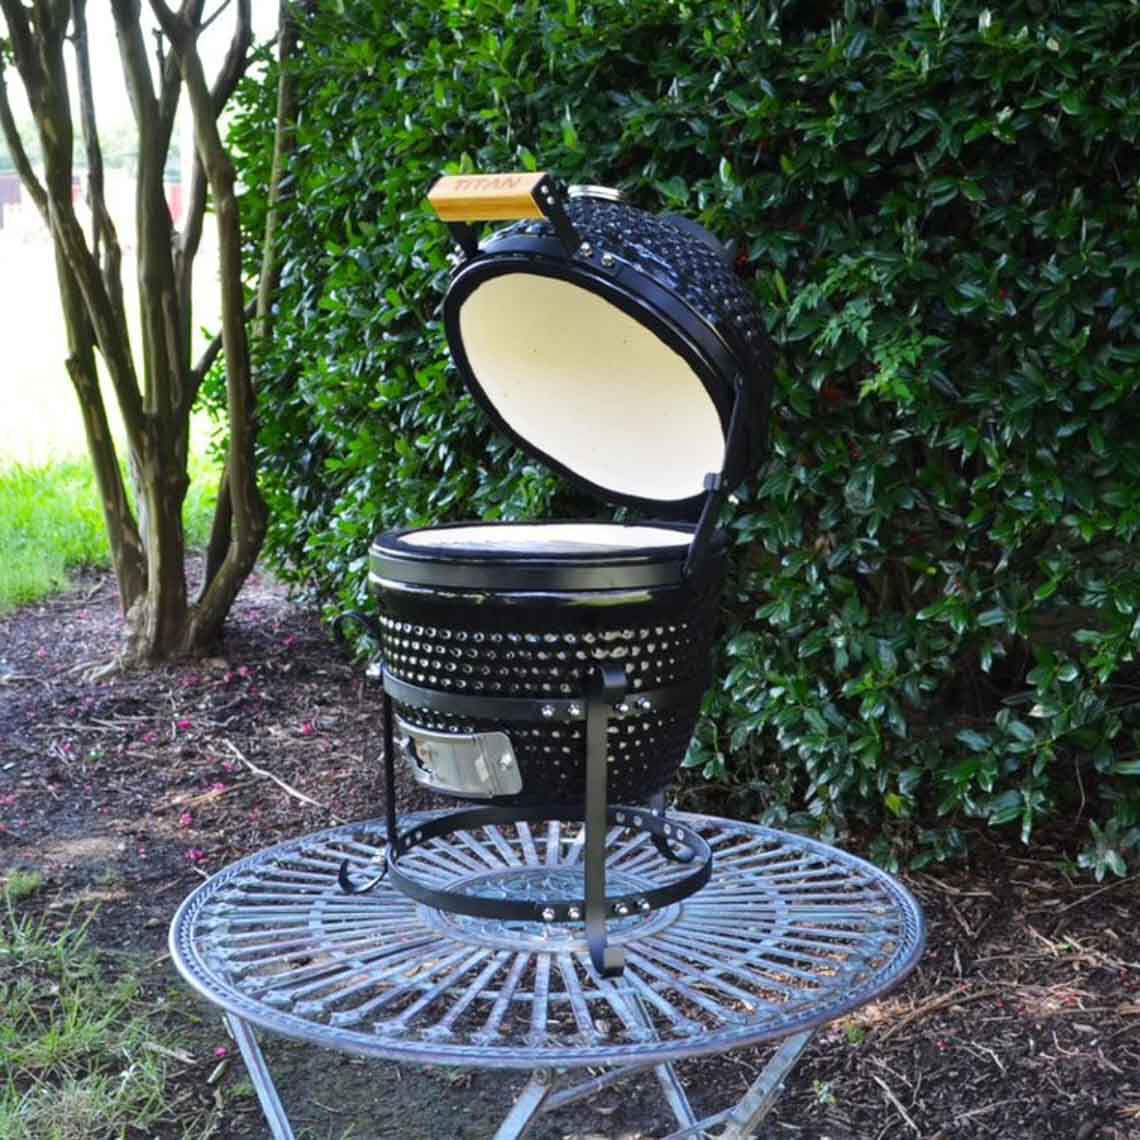 Scratch and Dent - 10” Kamado Ceramic Charcoal Grill - FINAL SALE - view 8